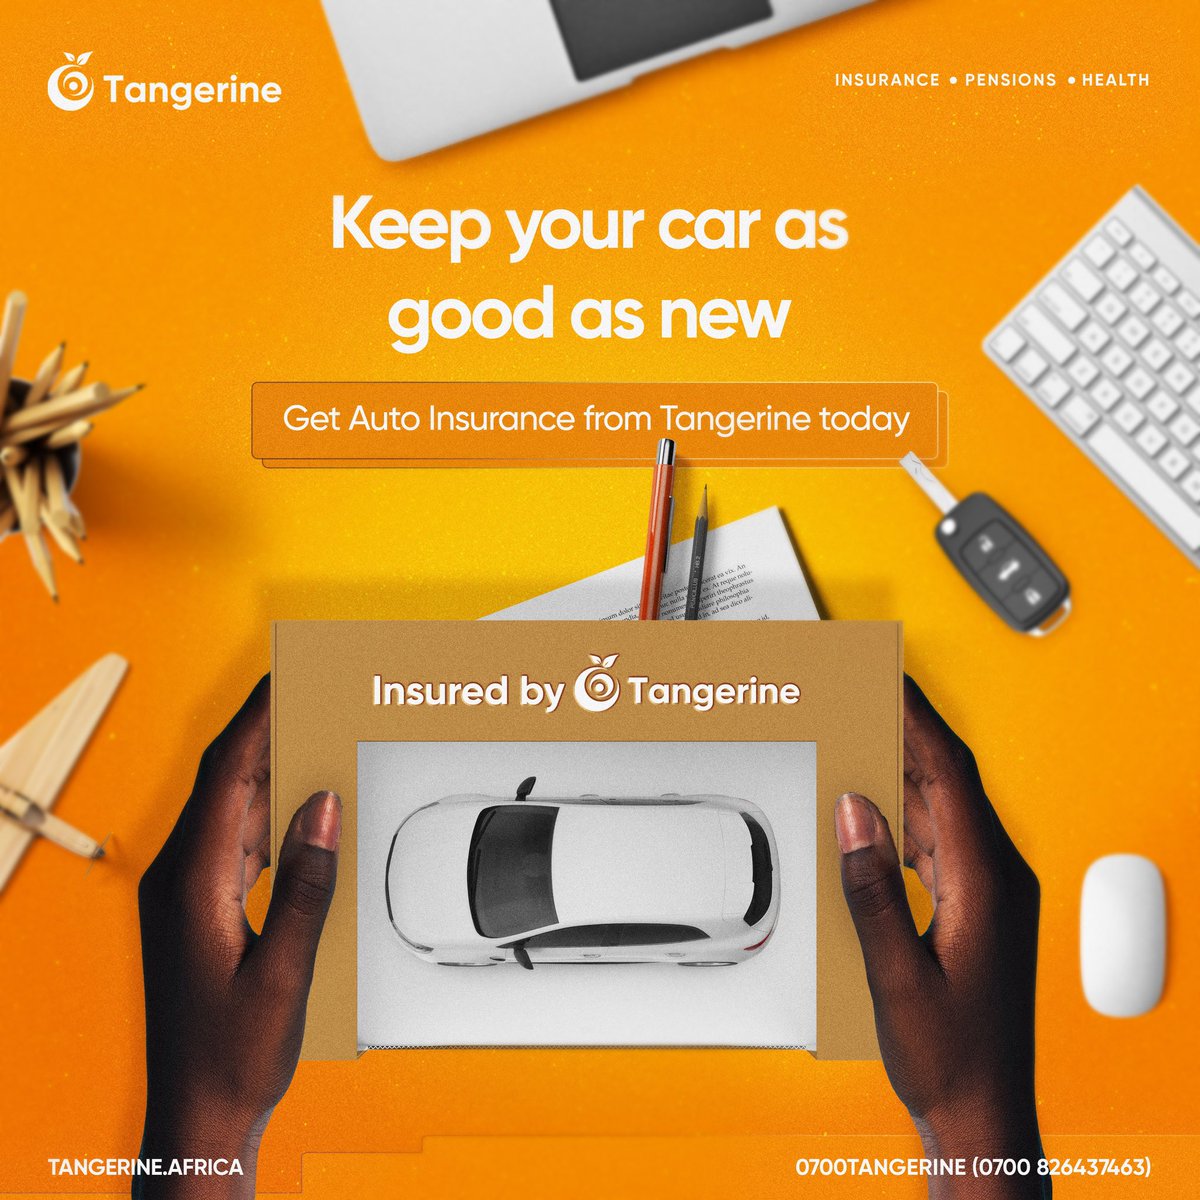 No matter how hectic the roads get, you can rest assured that we will always help you keep your car as good as new. 

Click on the link in bio to get started.

#AutoInsurance #coverforallthatmatters #tangerinefinancial #tangerineafrica